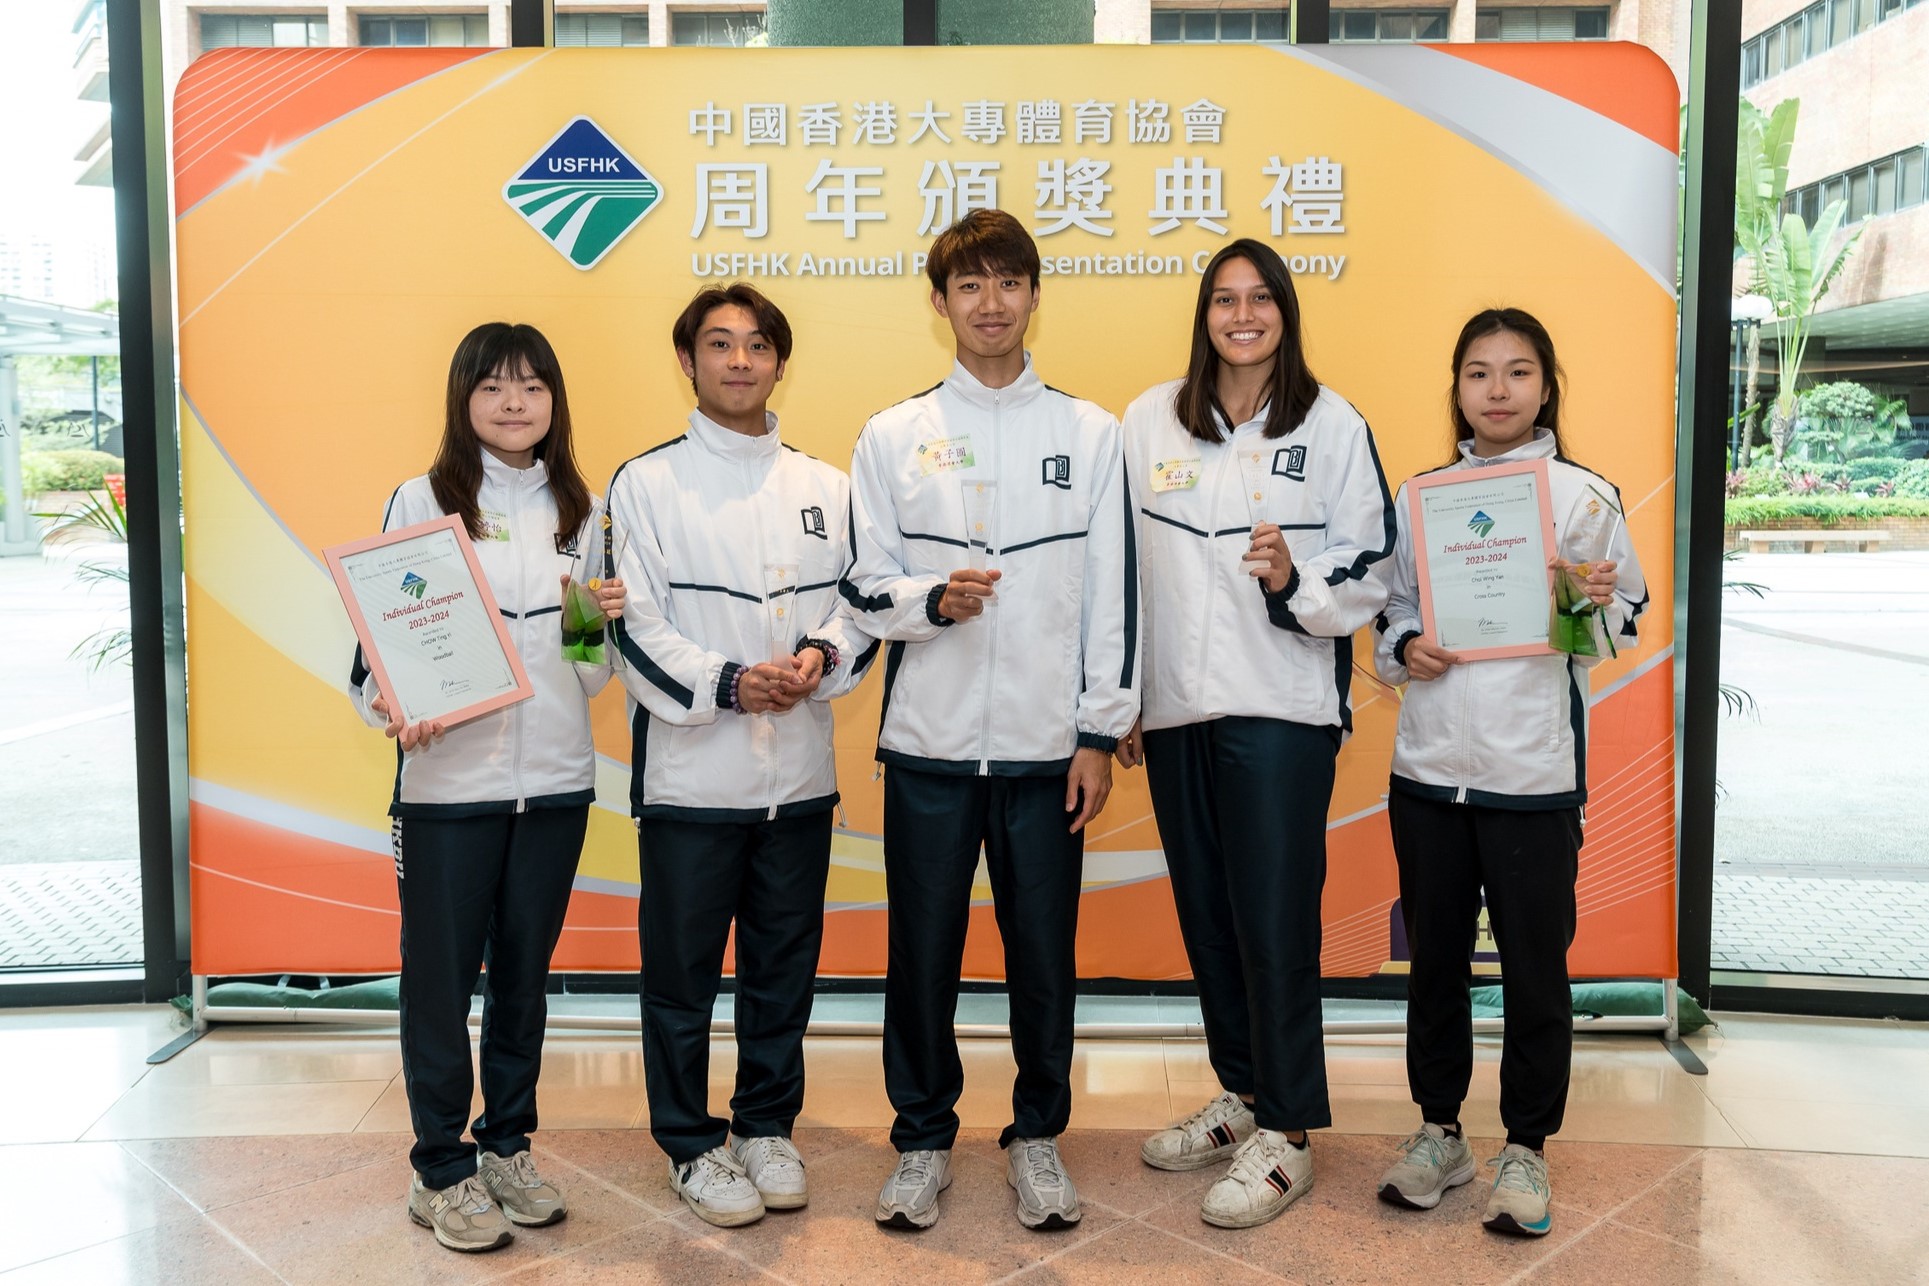 Seven student athletes honoured at Hong Kong USFHK Annual Prize Presentation Ceremony